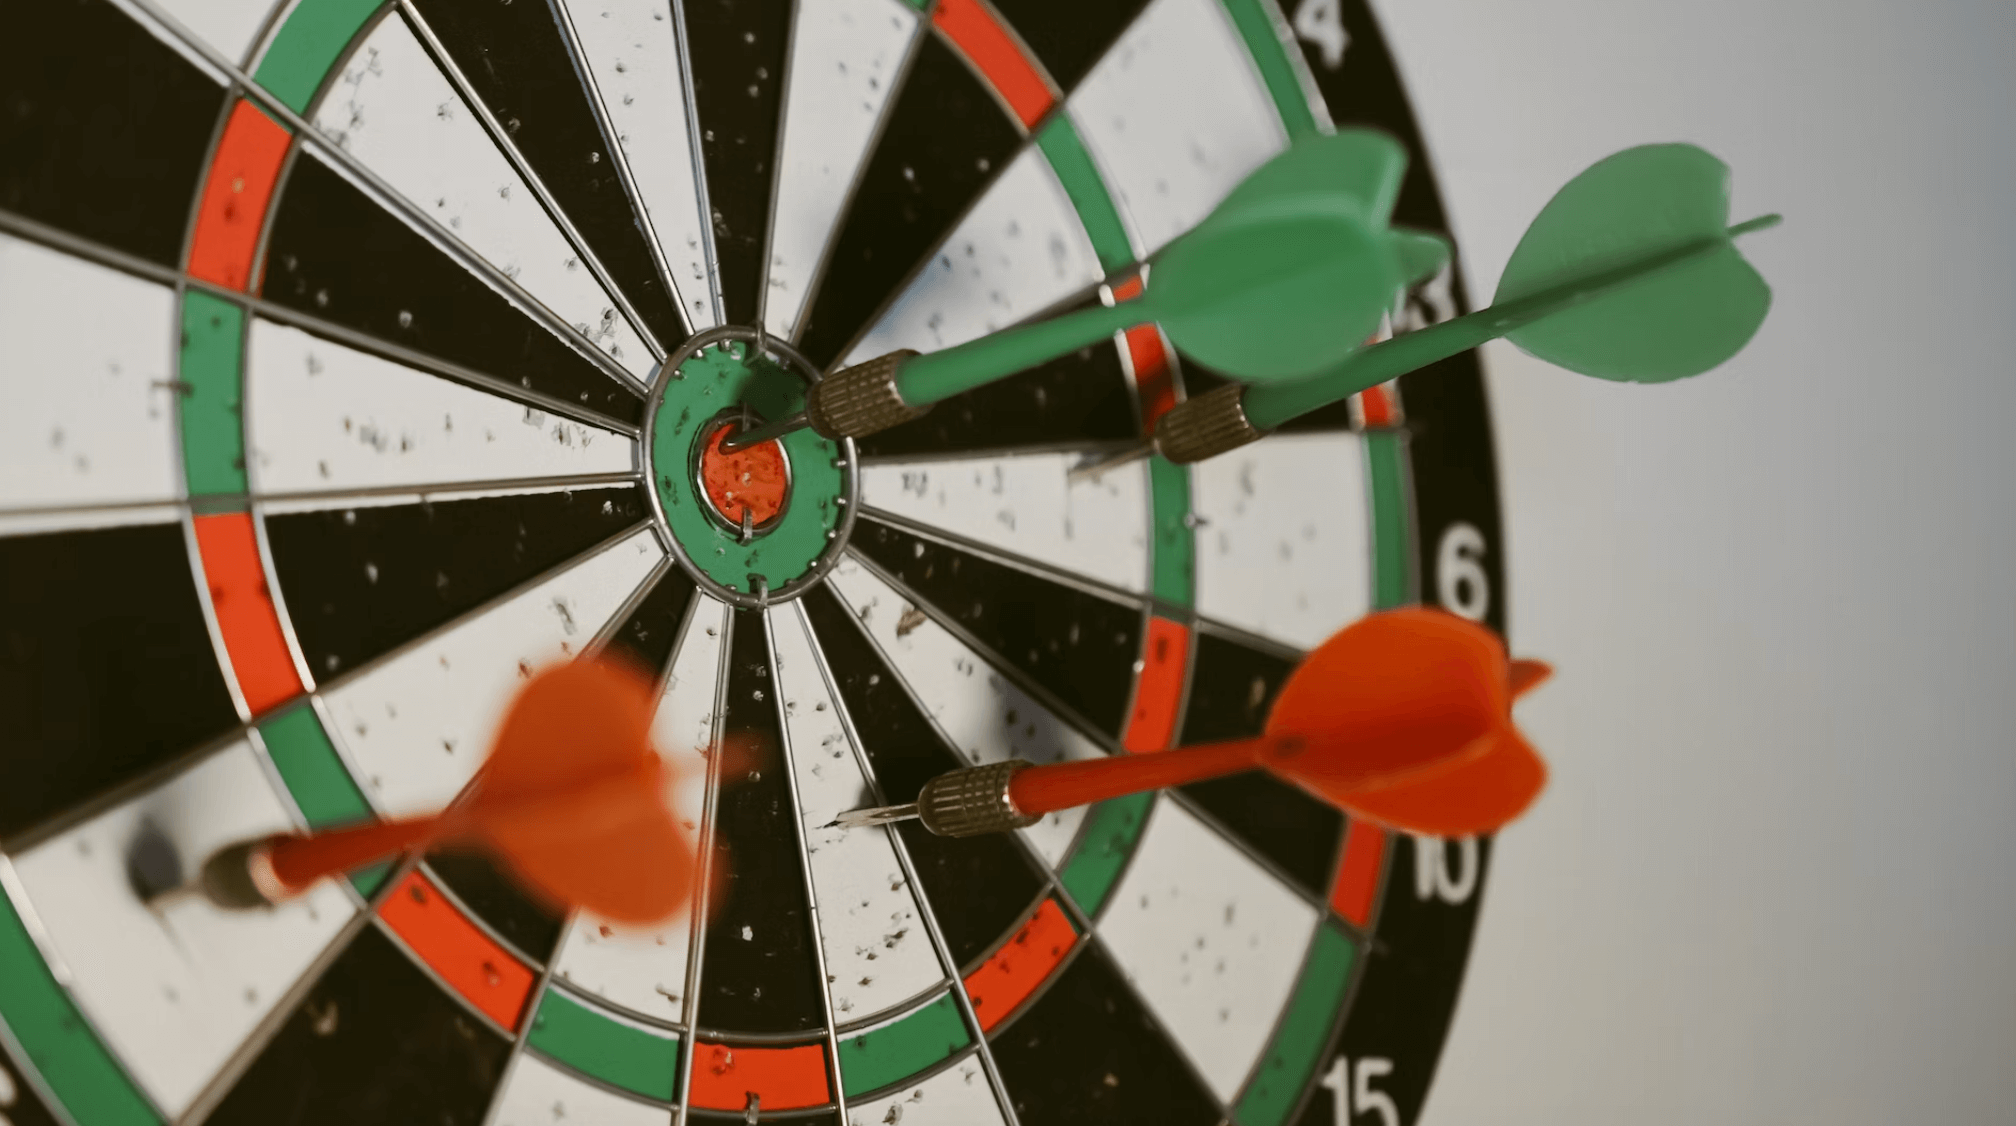 Dart board with darts on the target